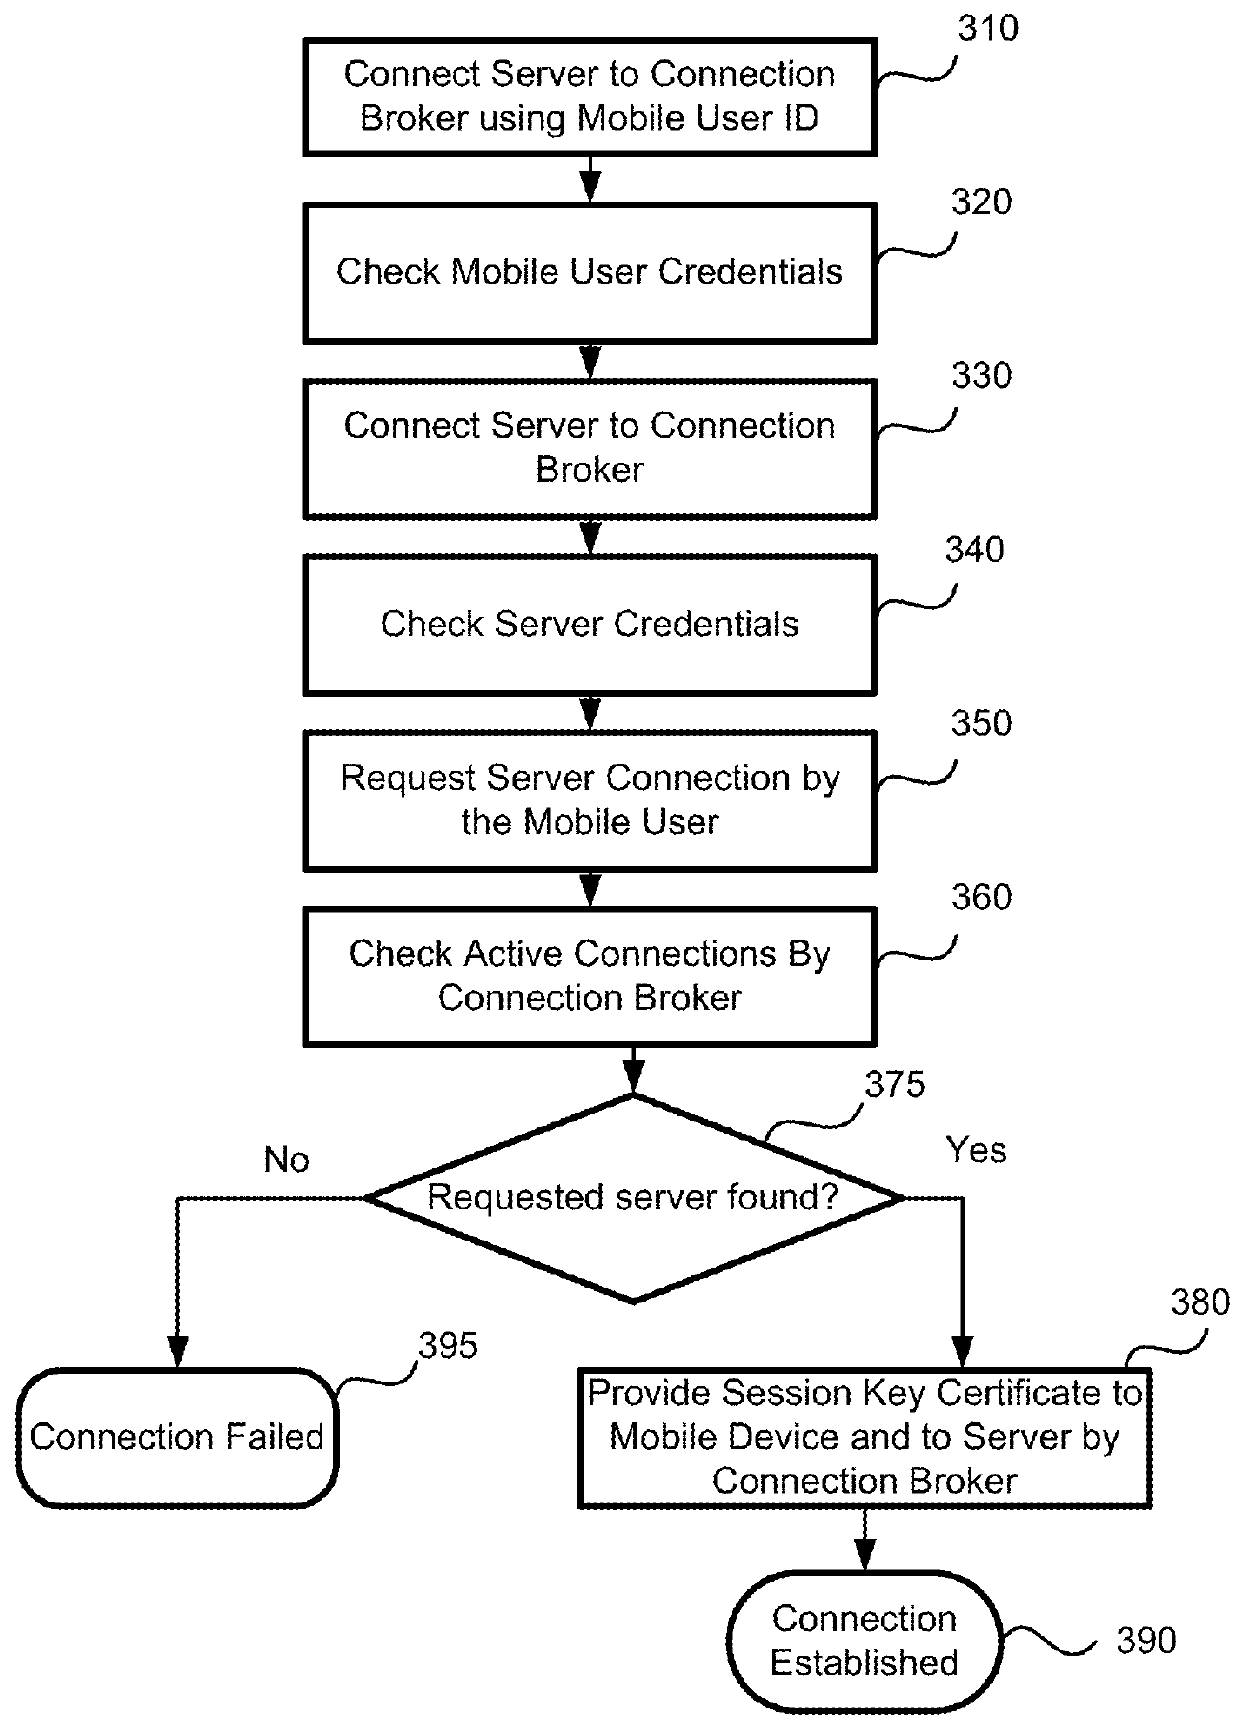 Method for downloading preauthorized applications to desktop computer using secure connection